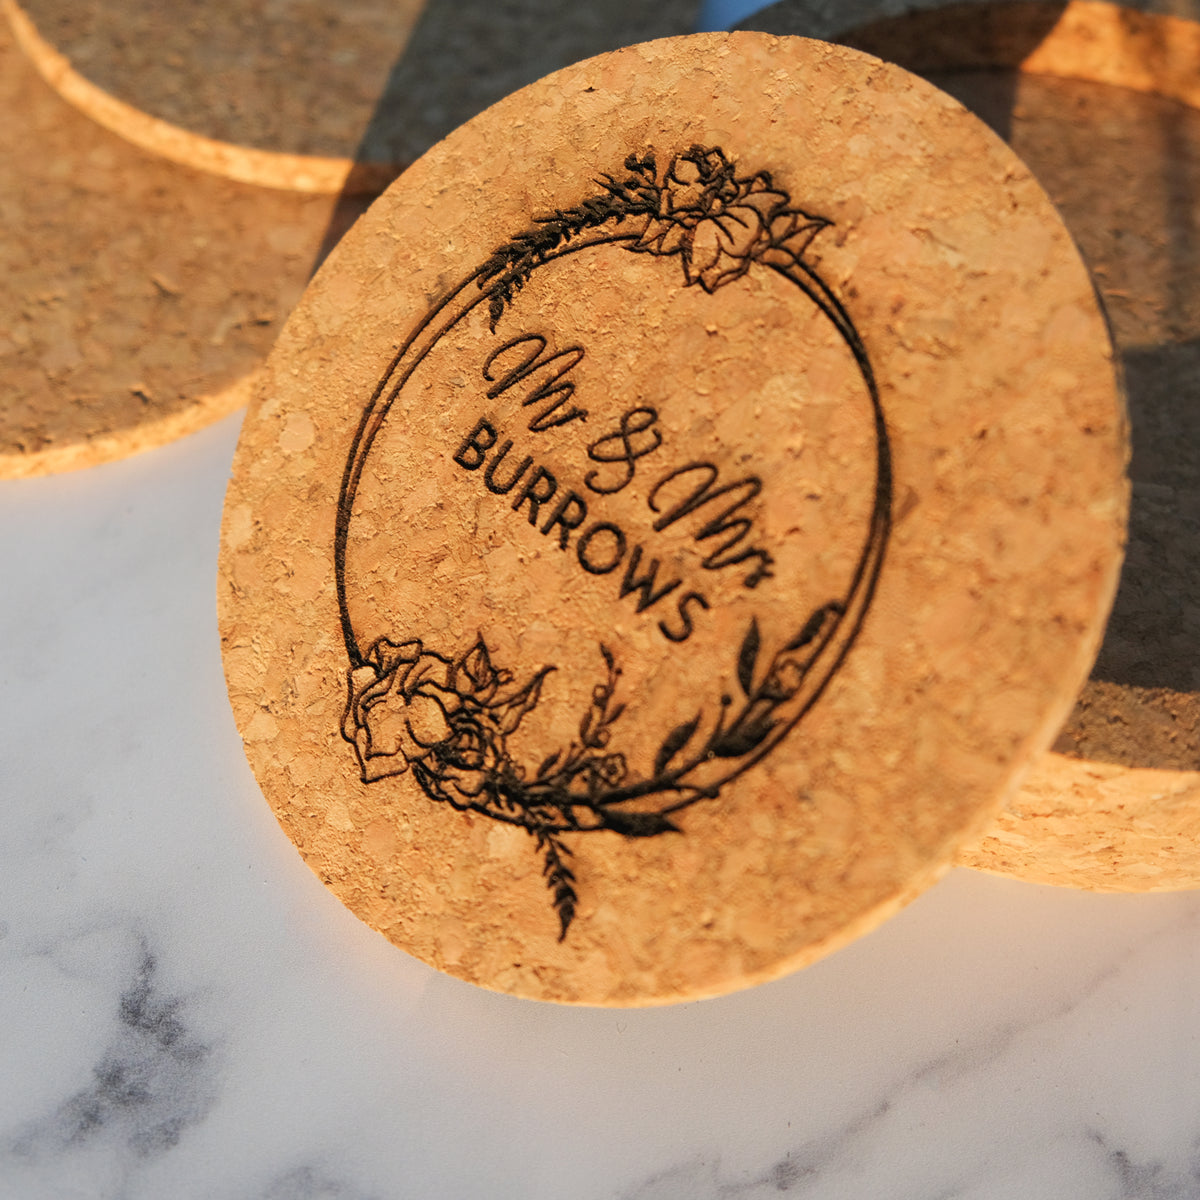 Personalized Cork Coaster Set for Couples, Design: N8 - Everything Etched